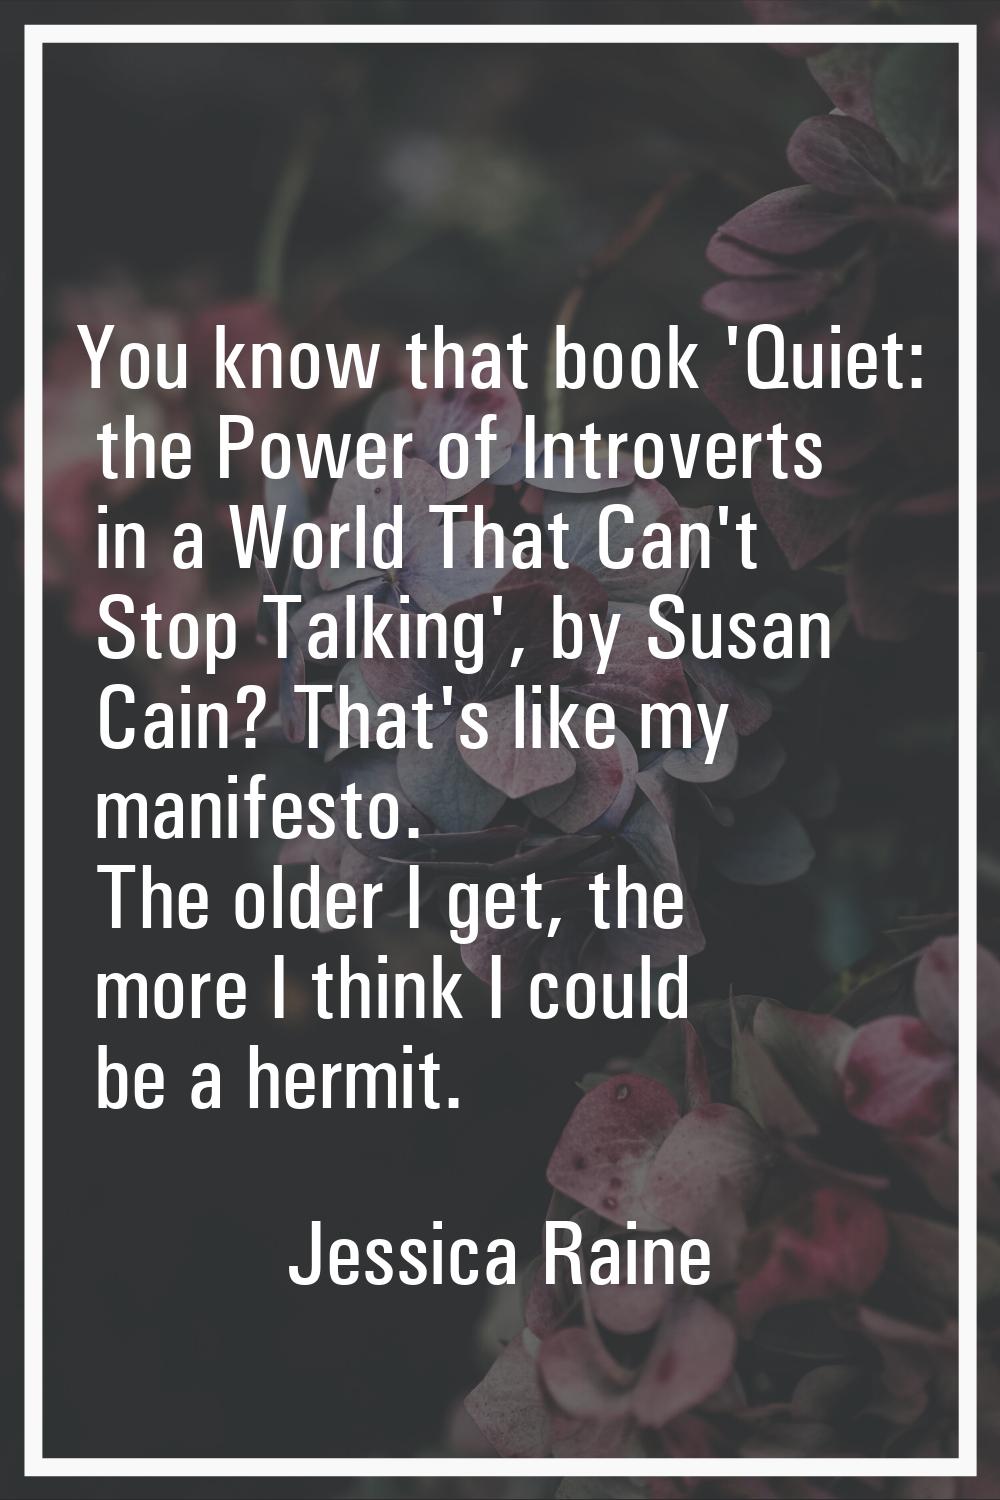 You know that book 'Quiet: the Power of Introverts in a World That Can't Stop Talking', by Susan Ca